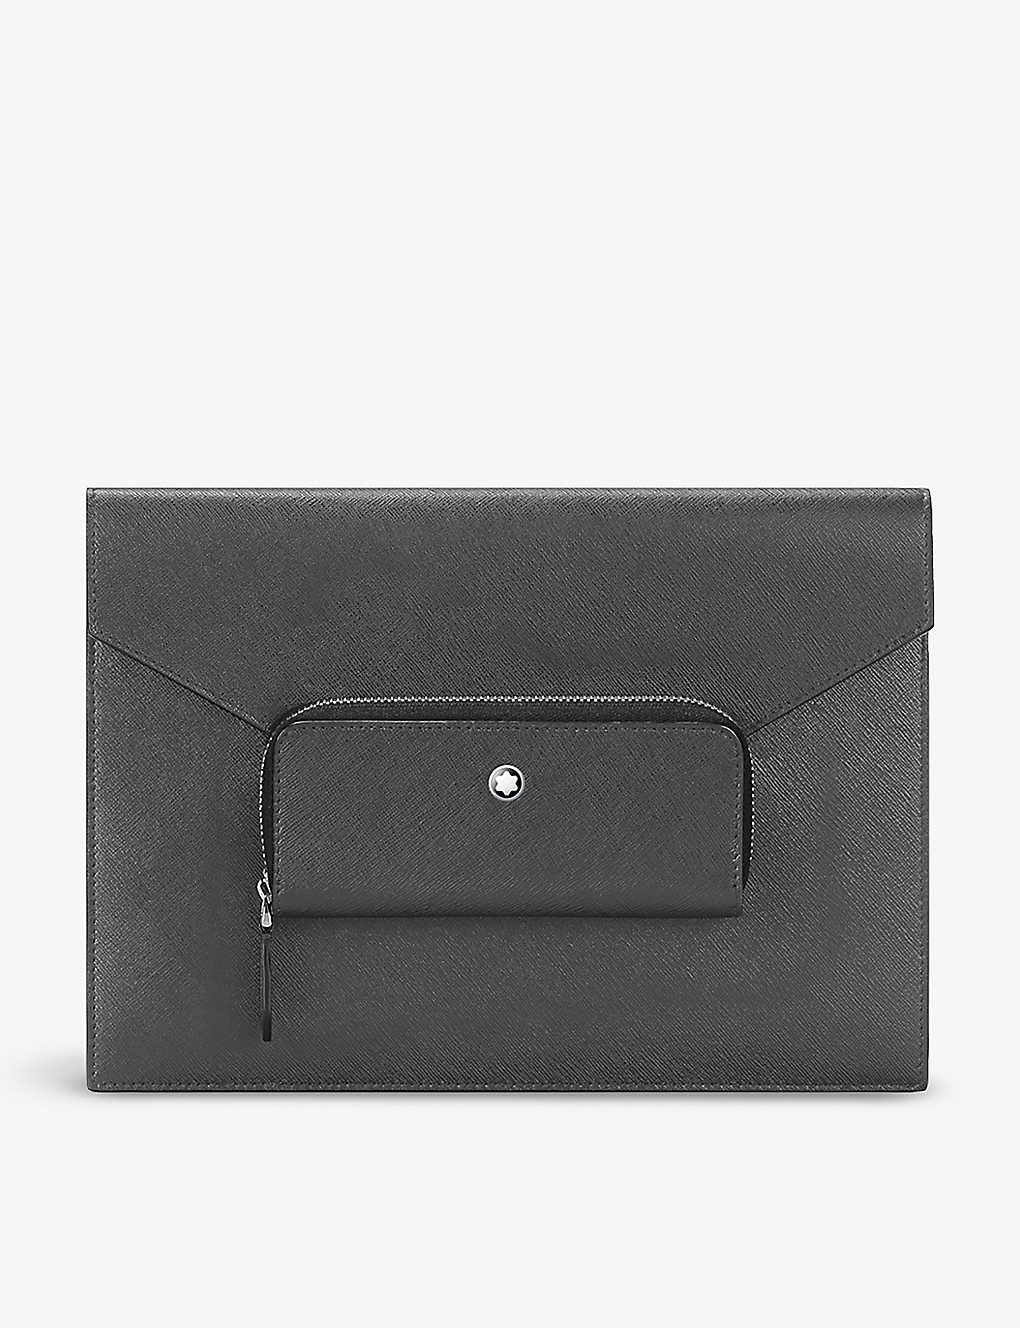 Montblanc Sartorial Envelope Pouch In Forged Iron